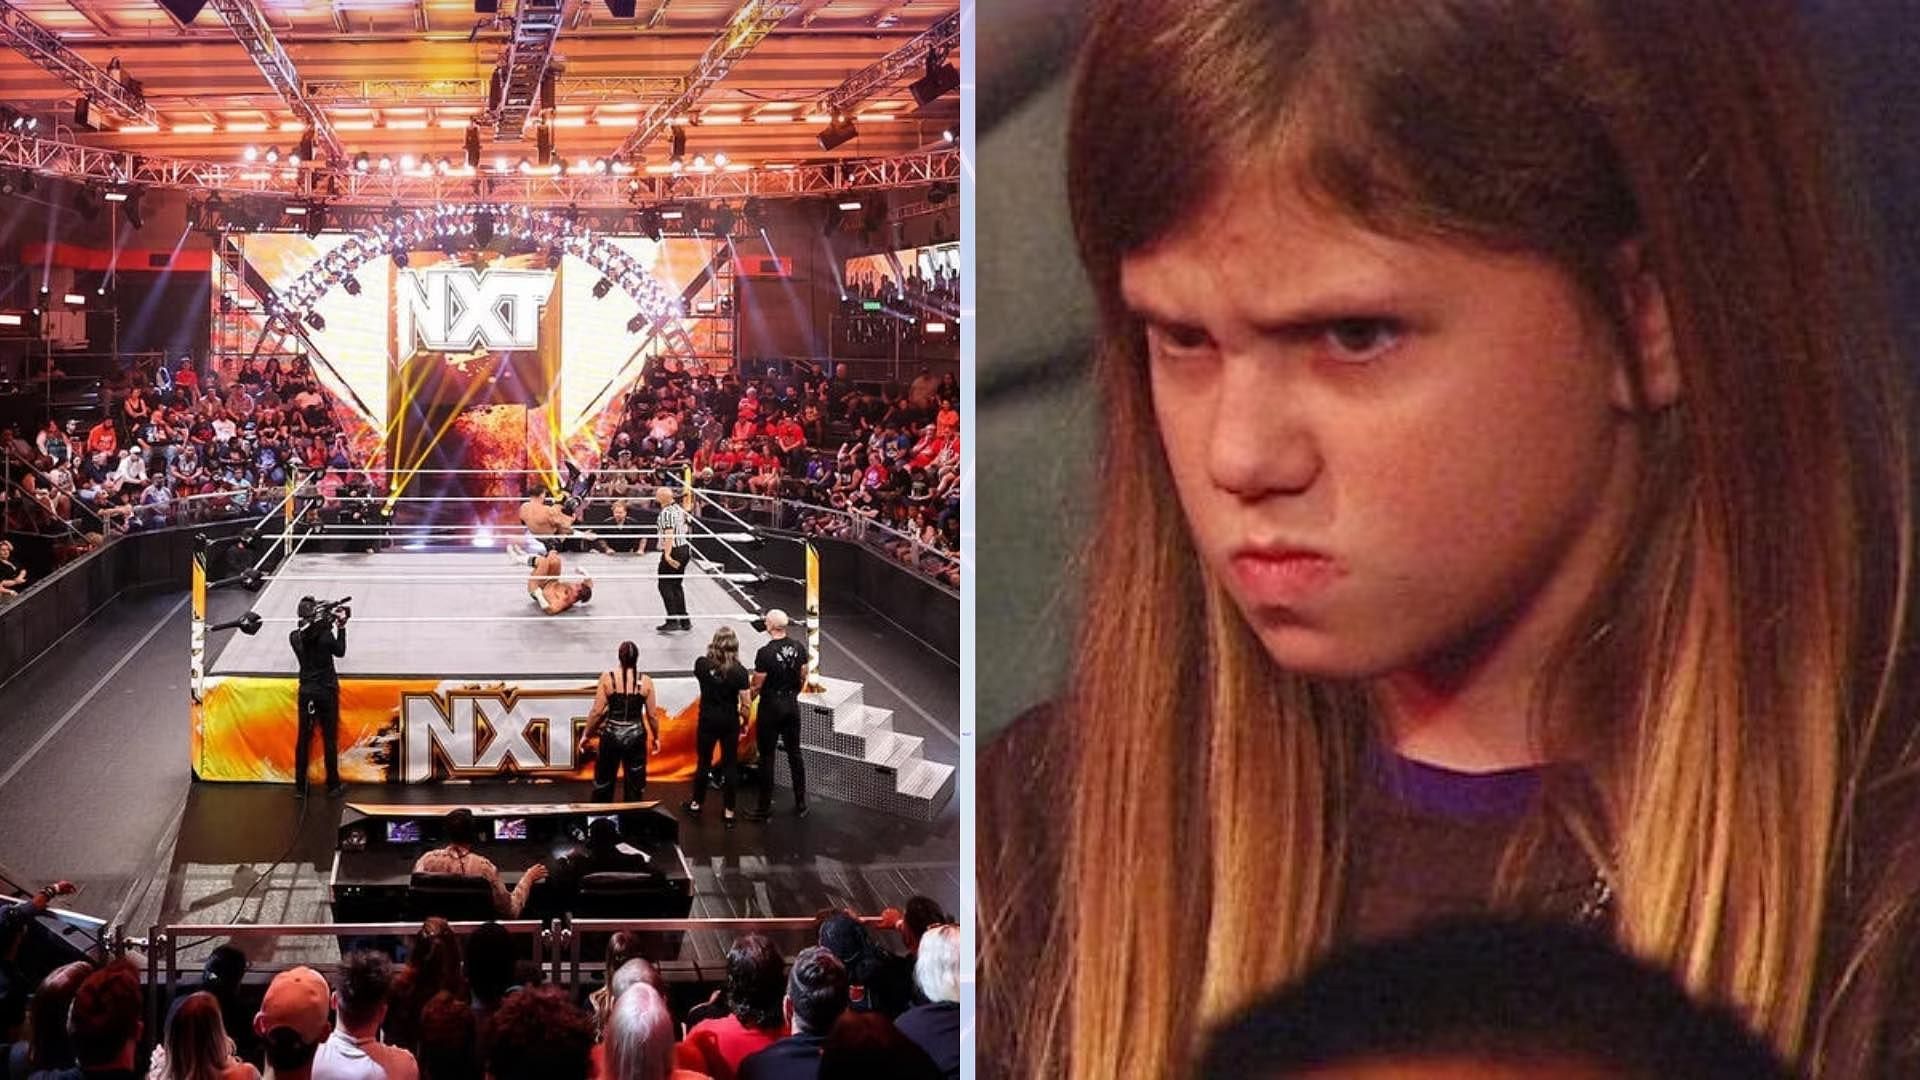 NXT this week was live from the WWE Performance Center